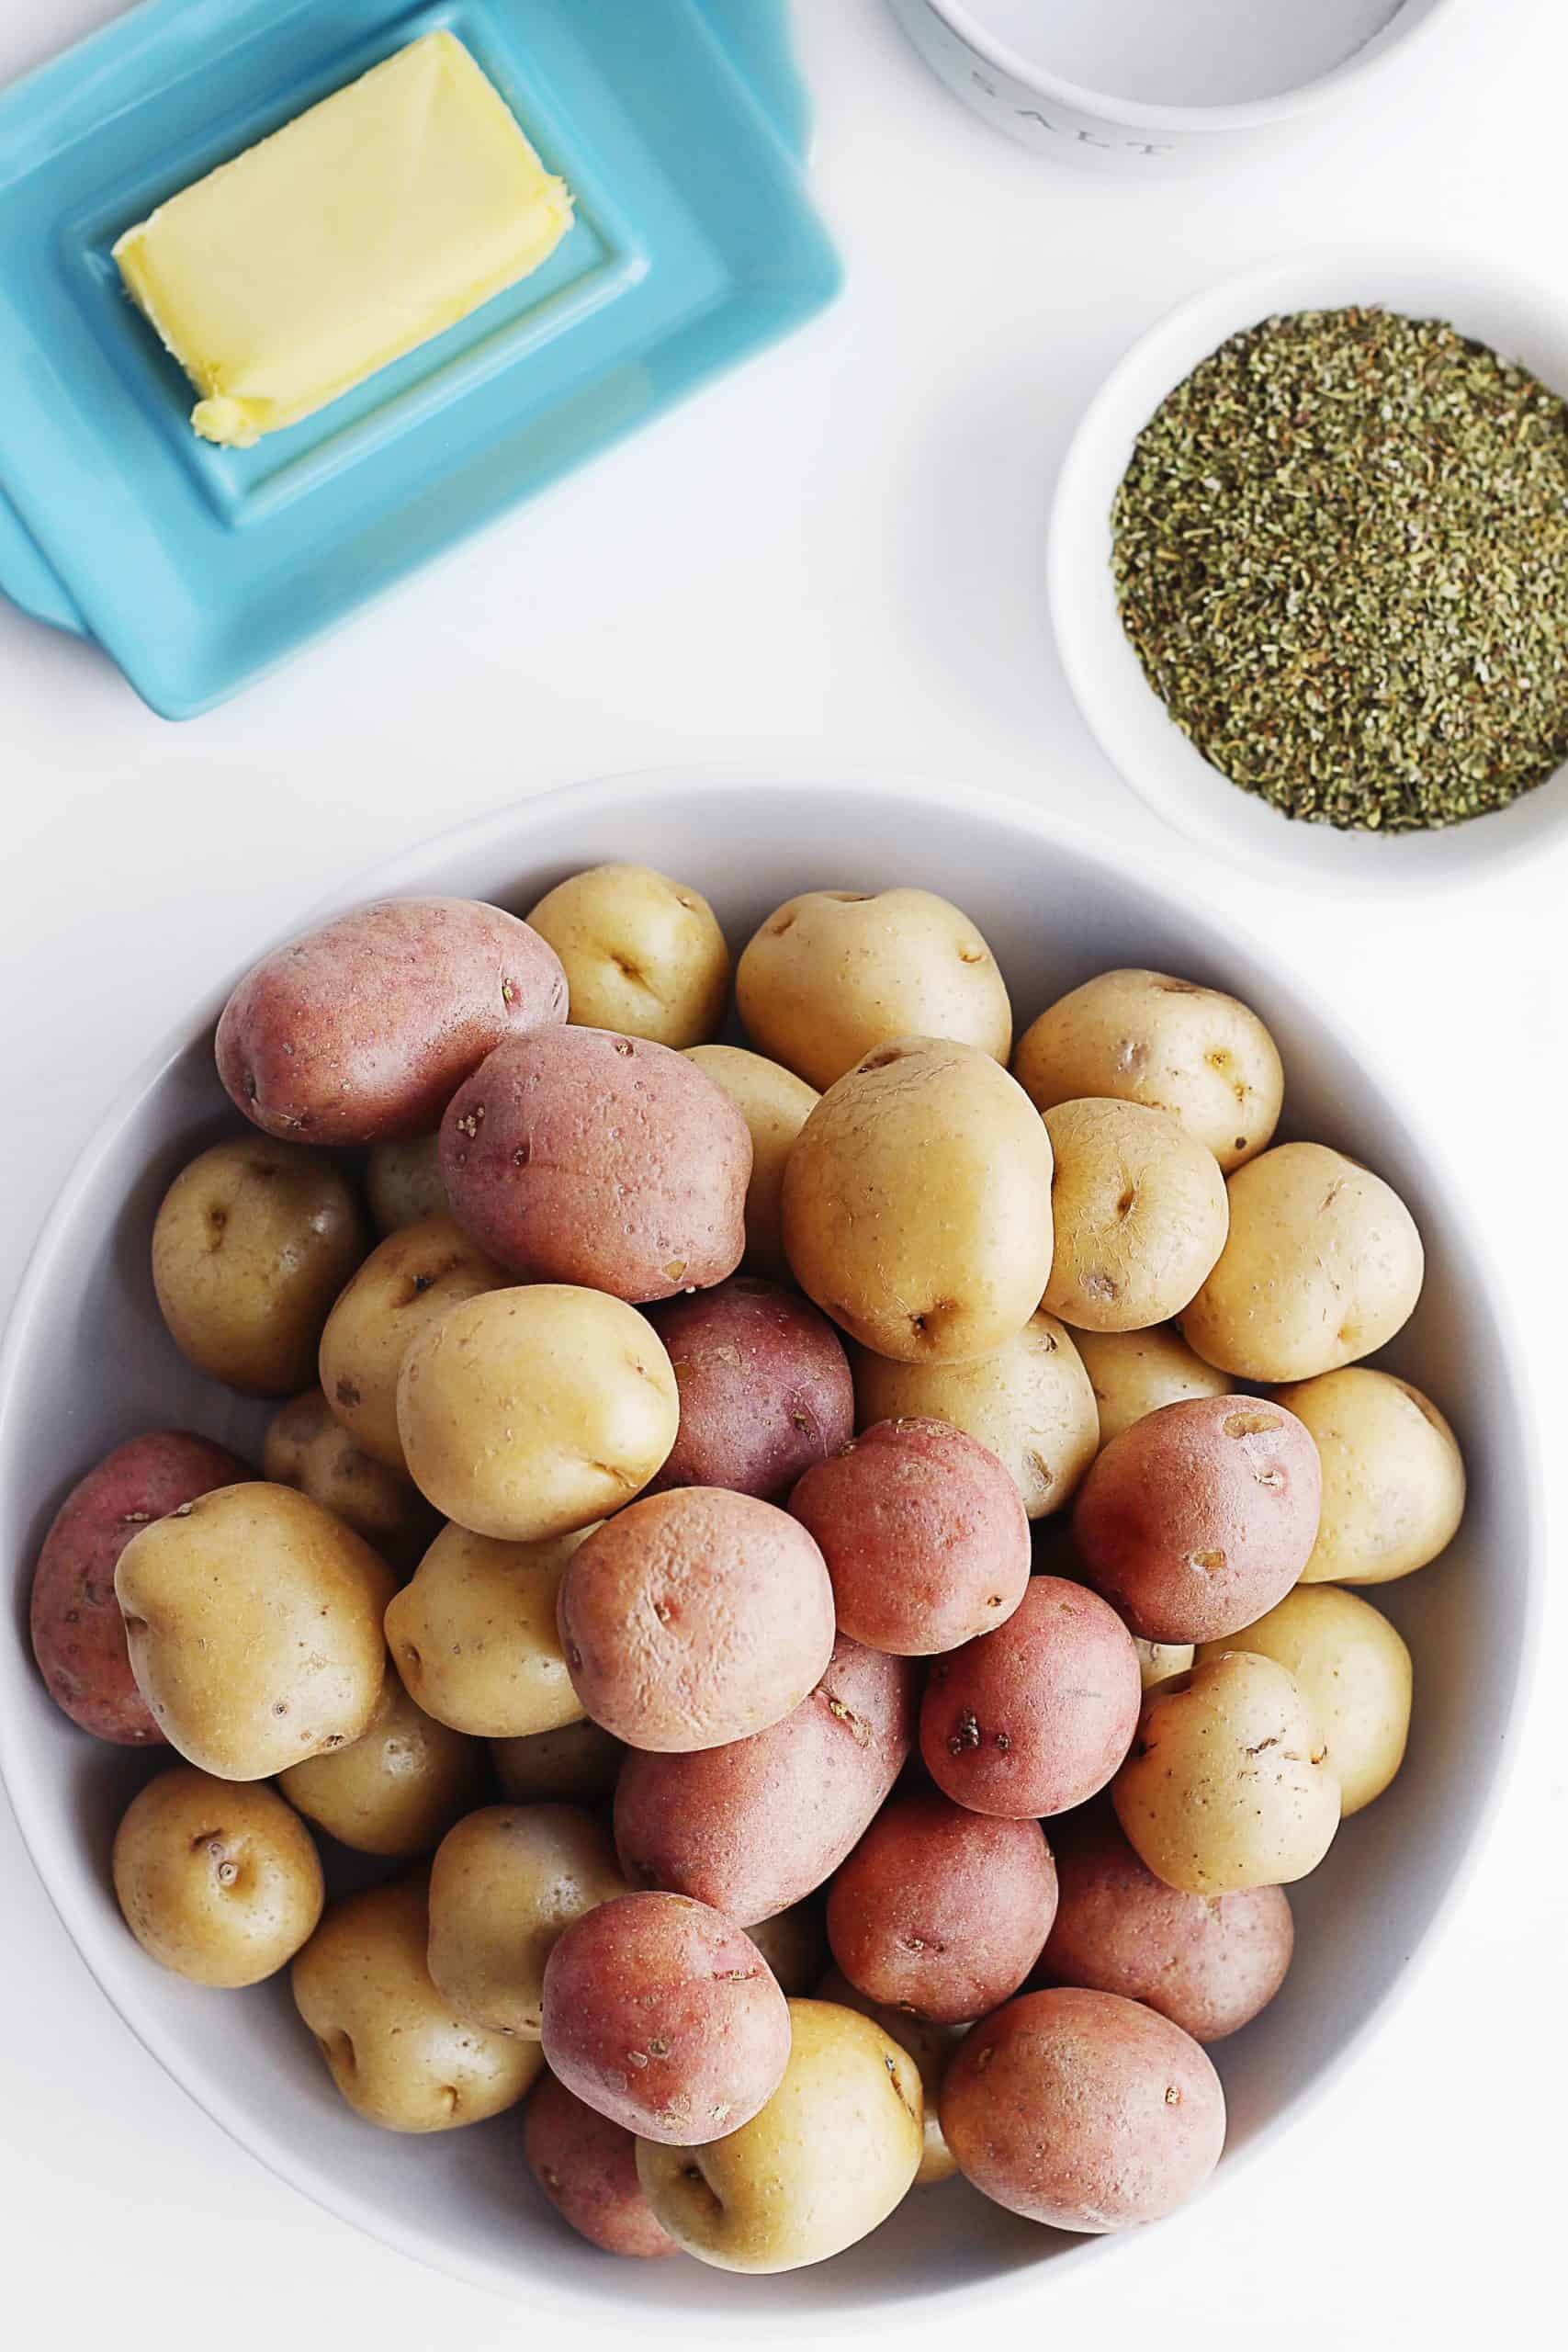 A picture of a bowl of raw baby potatoes next to Italian seasoning and butter.